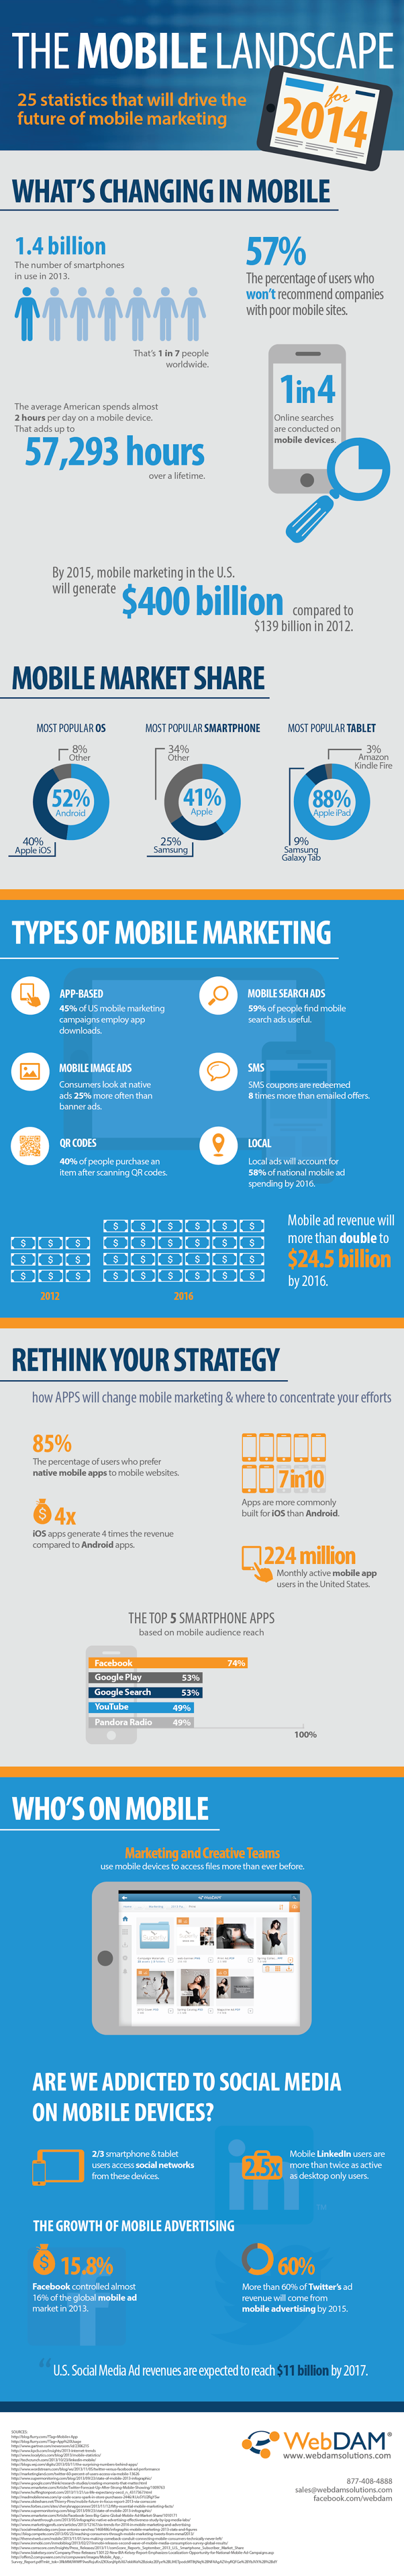 The Mobile marketing Landscape for 2014 - infographic